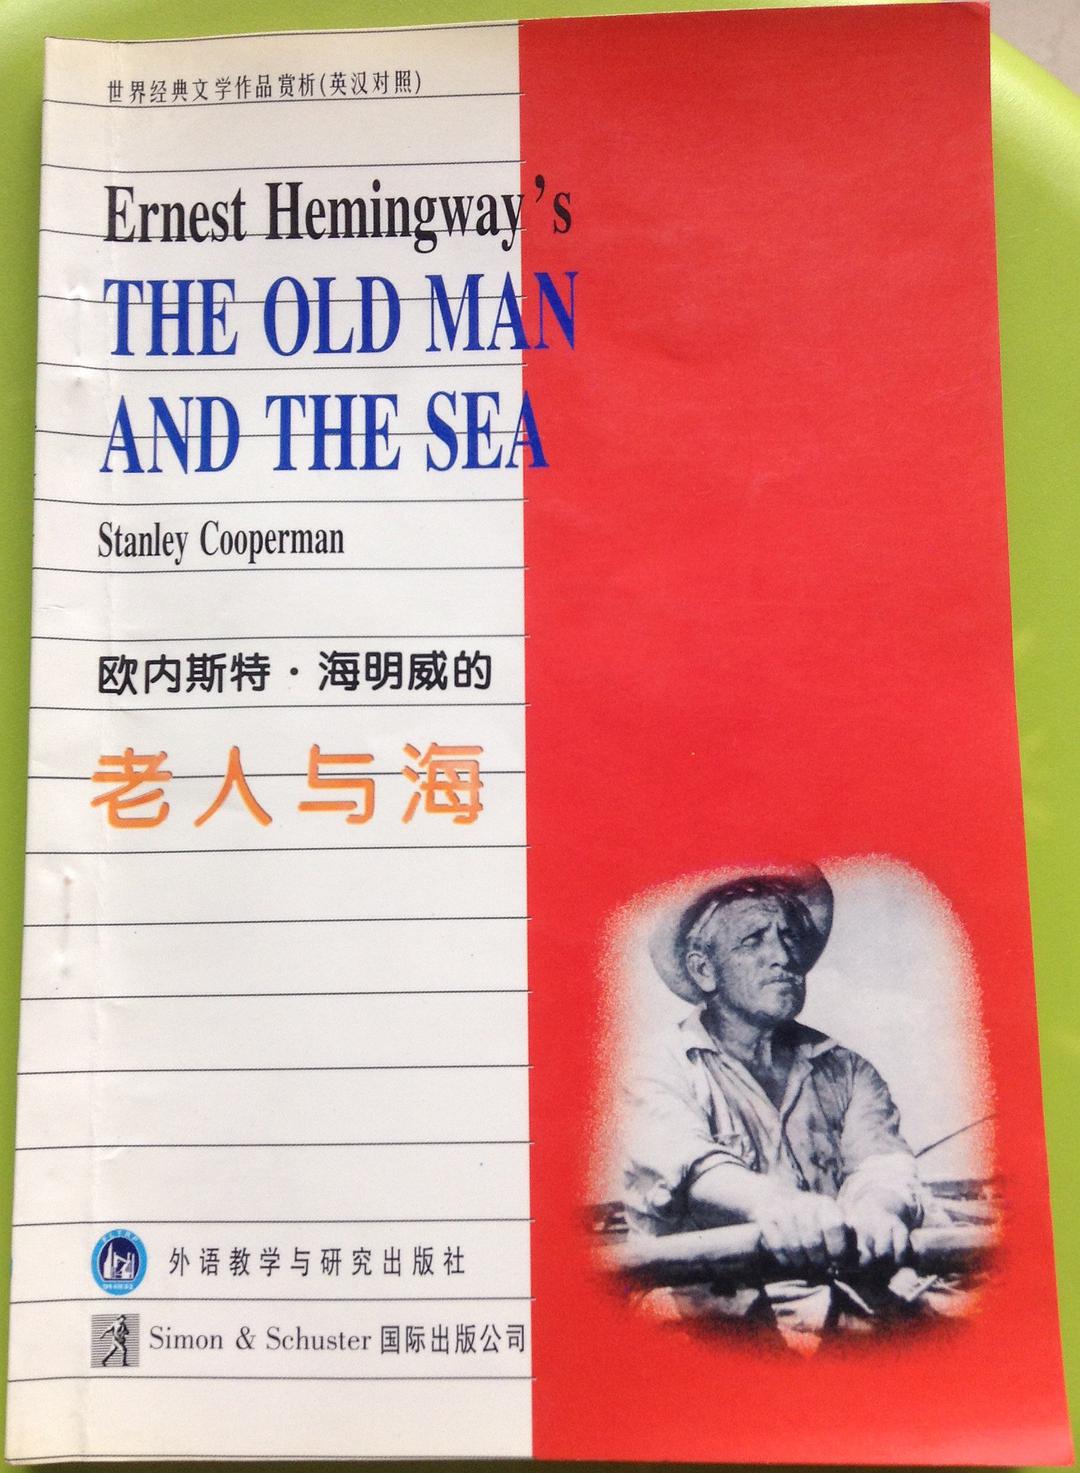 Ernest Hemingway's The old man and the sea